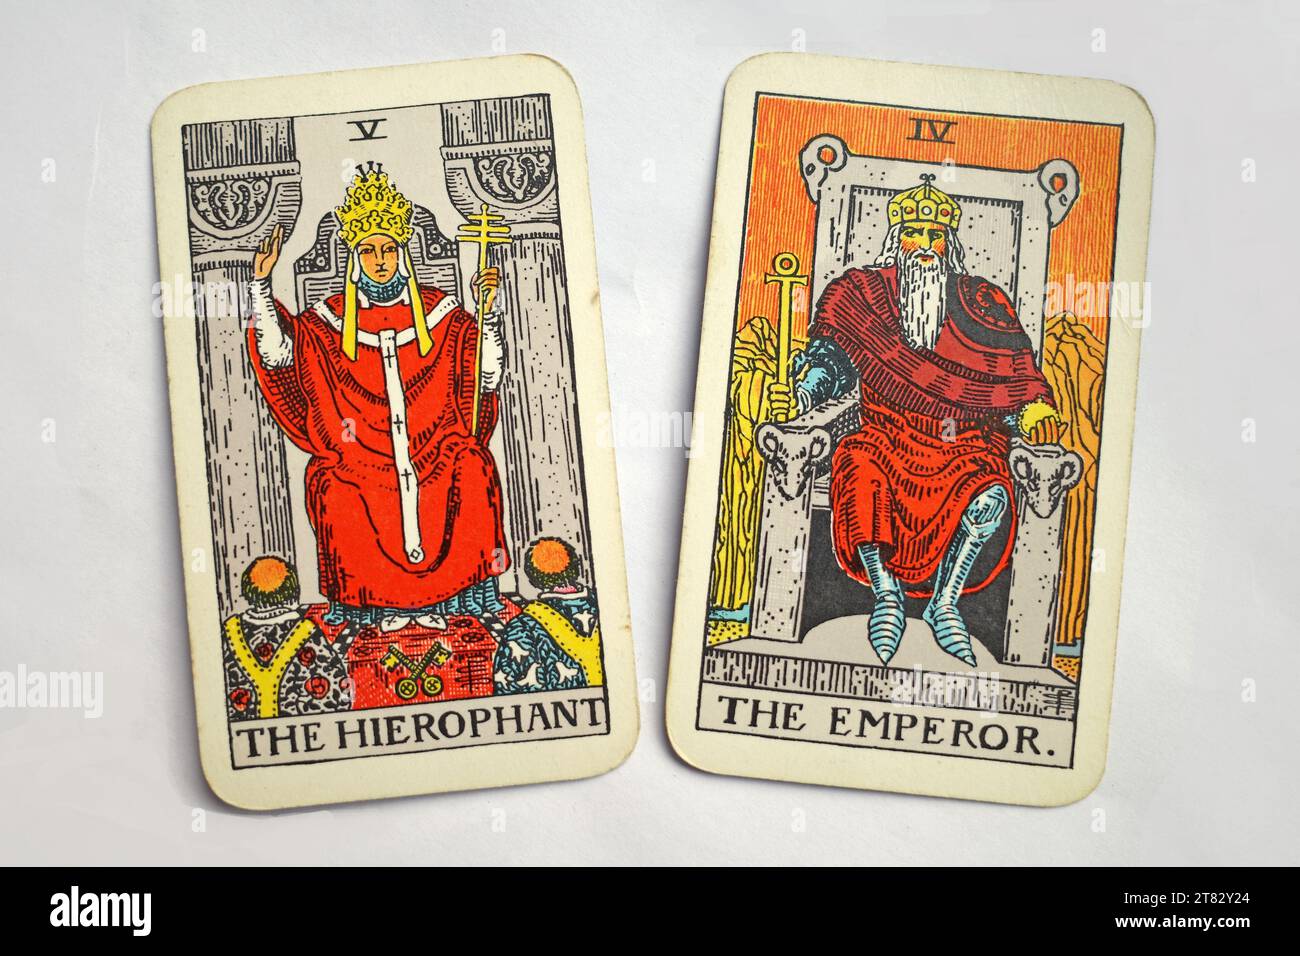 The Hyrophant and the Emperor. Two Rider Waite tarot cards from the Major Arcana Stock Photo